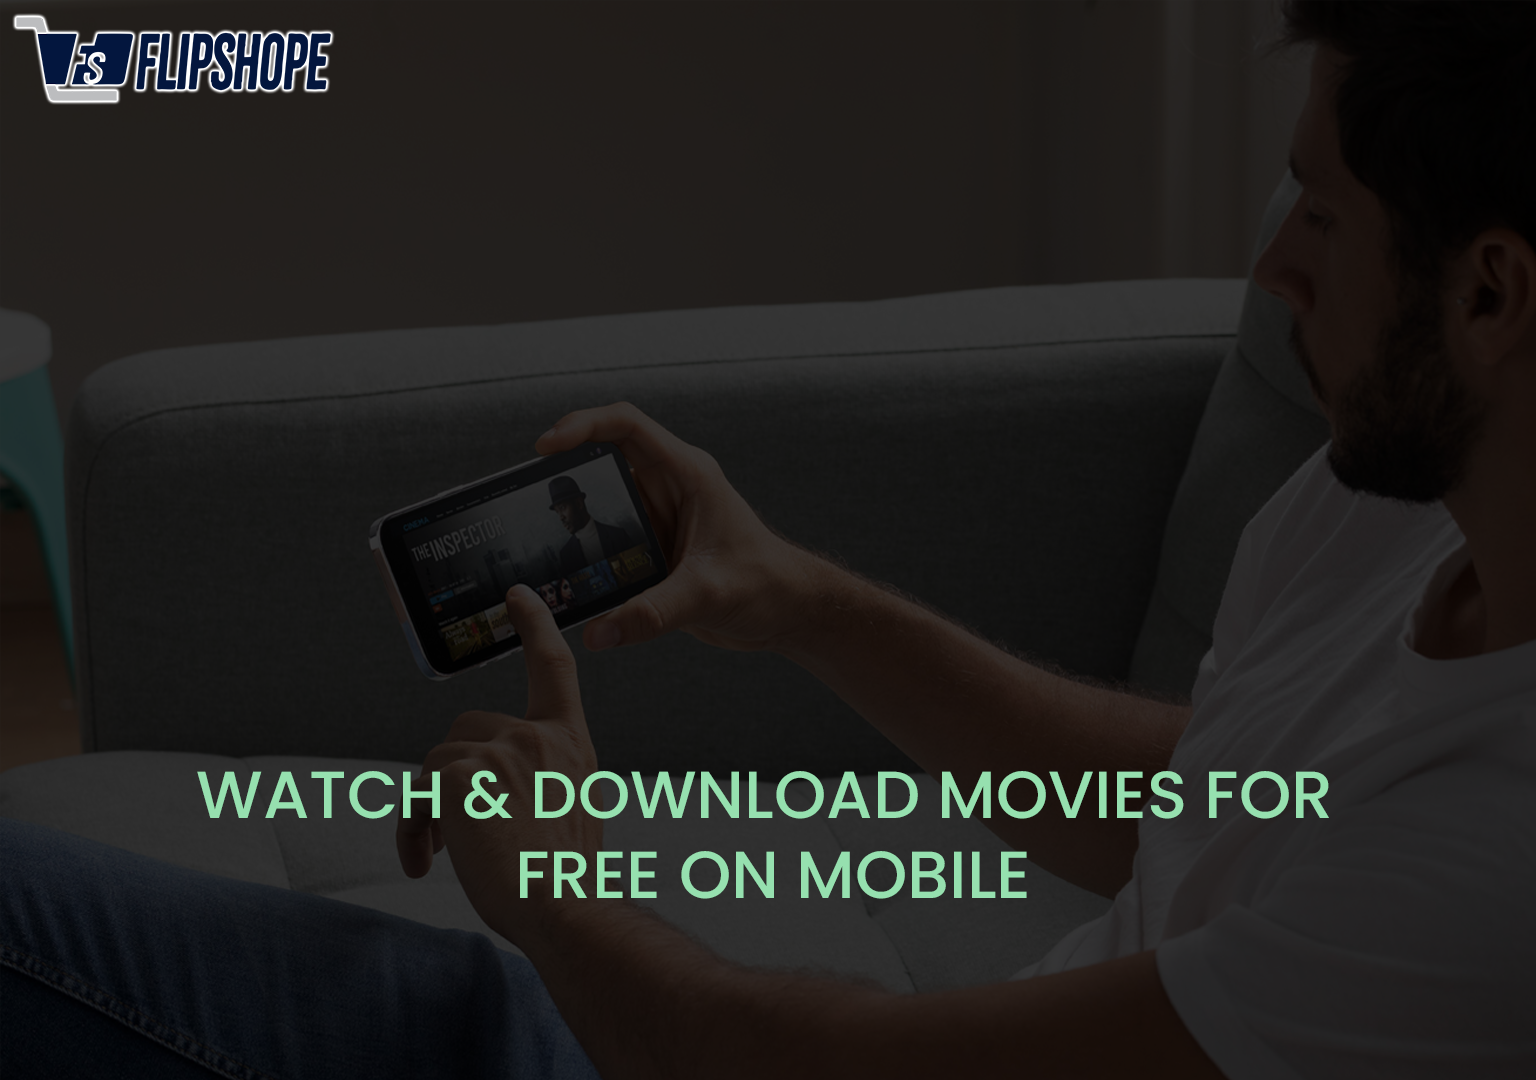 Watch & Download Movies for free on Mobile